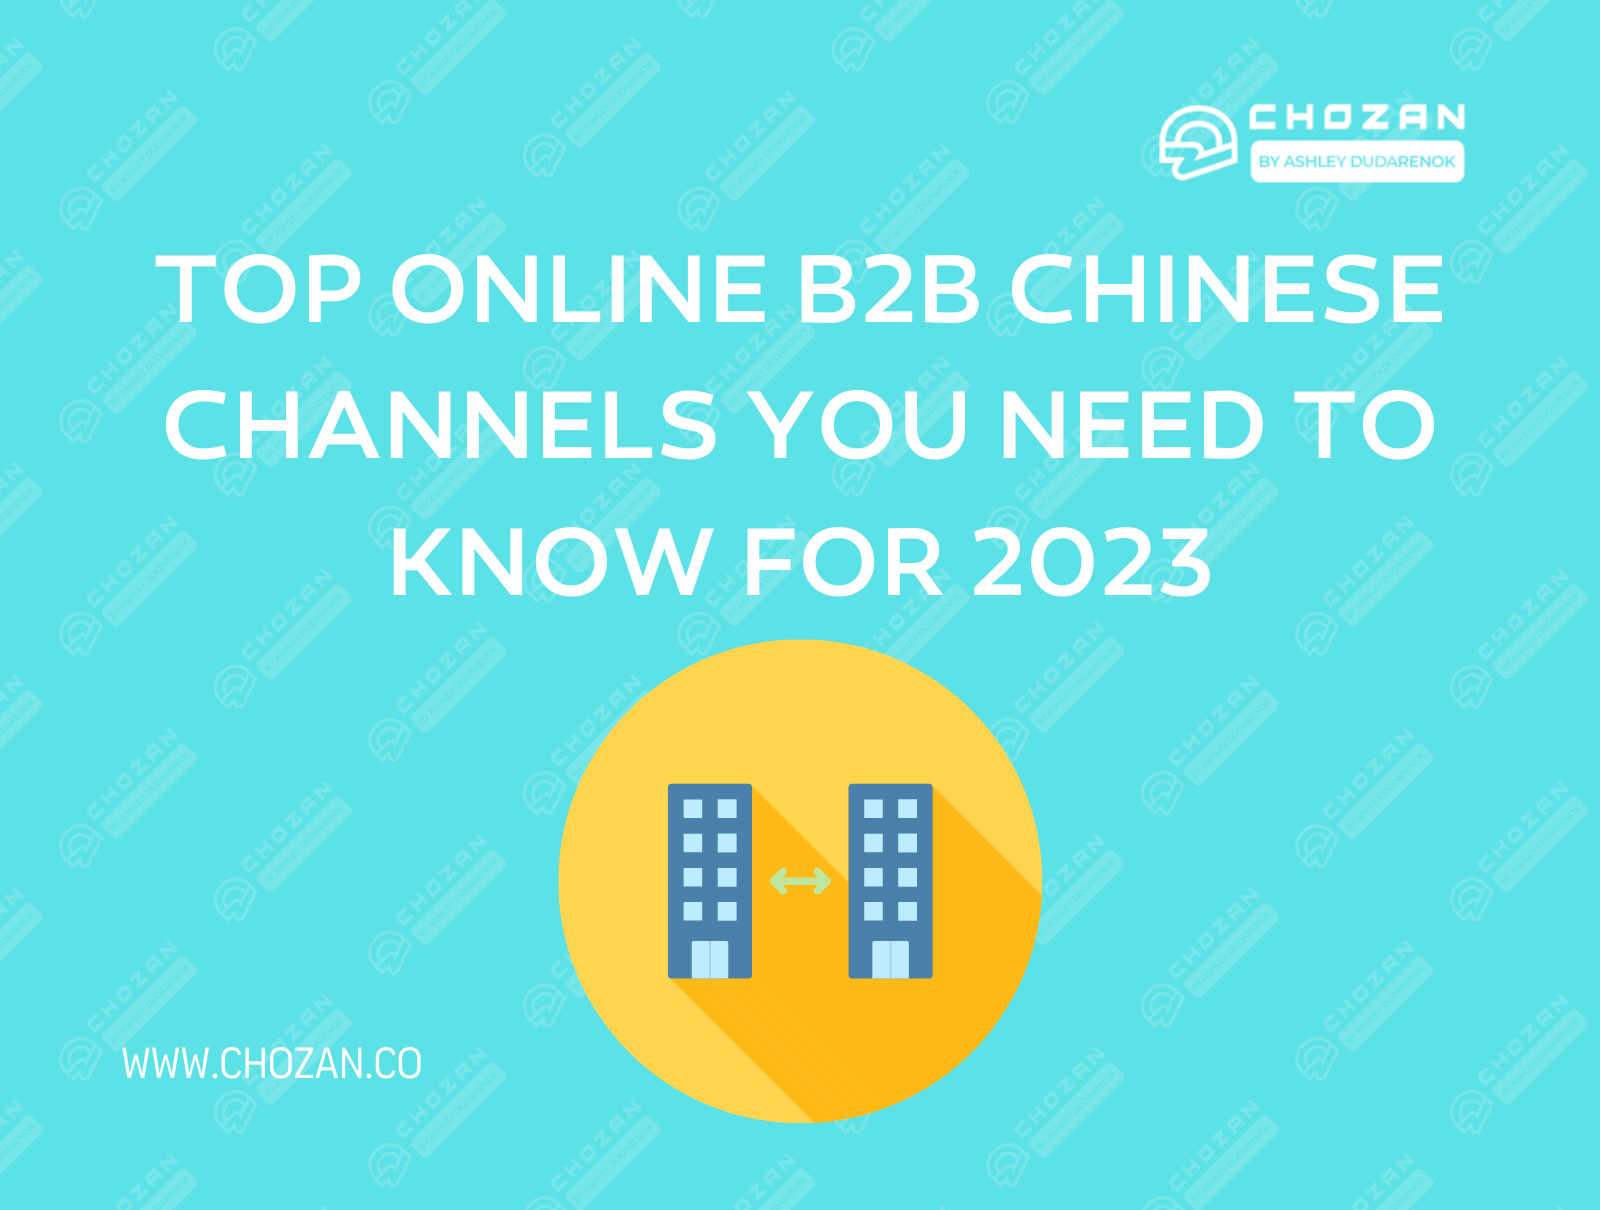 Top Online B2B Chinese Channels (Websites & Social Media) You Need To Know For 2023